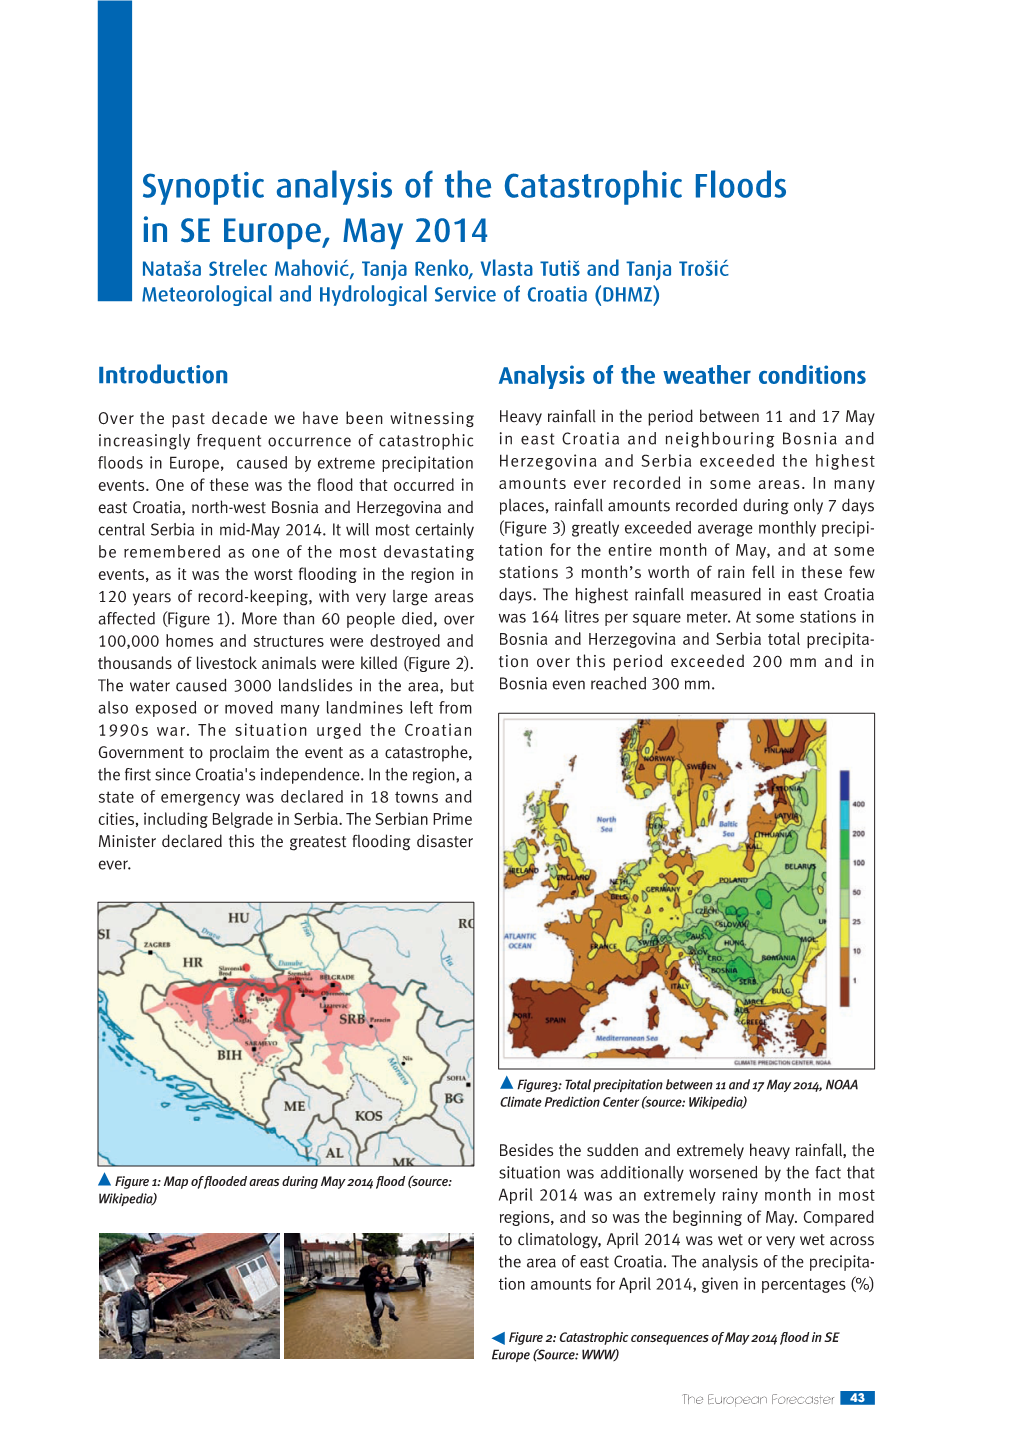 Synoptic Analysis of the Catastrophic Floods in SE Europe, May 2014